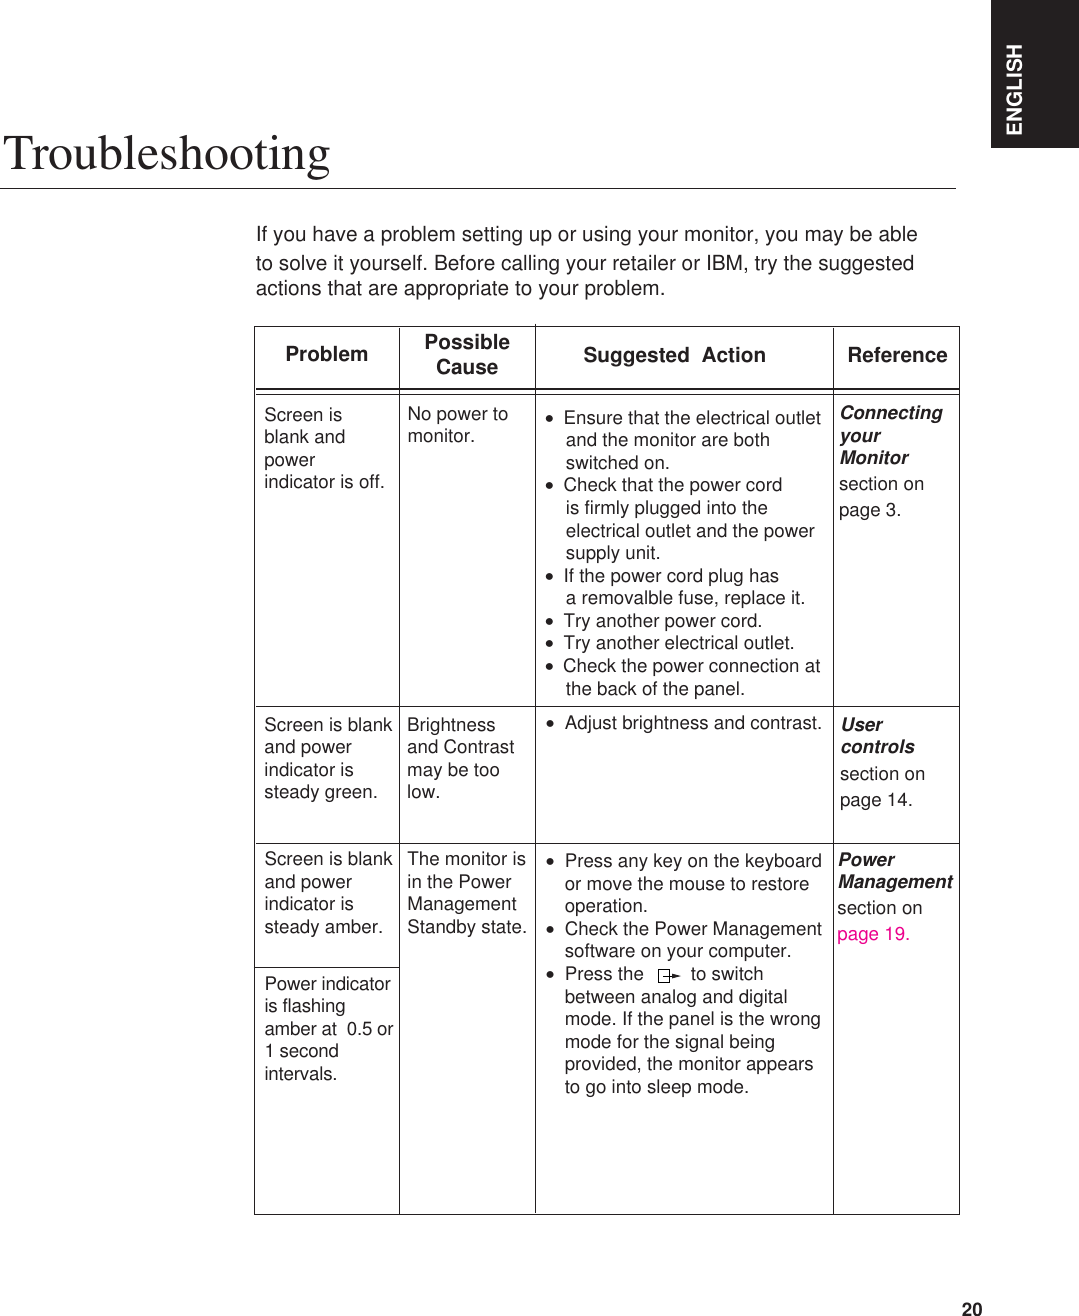 ENGLISH20TroubleshootingIf you have a problem setting up or using your monitor, you may be able to solve it yourself. Before calling your retailer or IBM, try the suggestedactions that are appropriate to your problem.ProblemNo power tomonitor.PossibleCause Suggested  Action  ReferenceBrightnessand Contrastmay be toolow.The monitor isin the PowerManagementStandby state.Screen isblank andpowerindicator is off.Screen is blankand powerindicator issteady green.Screen is blankand powerindicator issteady amber.Usercontrolssection on page 14.PowerManagementsection on page 19.ConnectingyourMonitorsection on  page 3.•Adjust brightness and contrast.•Press any key on the keyboardor move the mouse to restoreoperation.   •Check the Power Managementsoftware on your computer.•Press the         to switchbetween analog and digitalmode. If the panel is the wrongmode for the signal beingprovided, the monitor appearsto go into sleep mode.•  Ensure that the electrical outlet  and the monitor are both switched on.•  Check that the power cord is firmly plugged into theelectrical outlet and the powersupply unit.•  If the power cord plug has a removalble fuse, replace it.•  Try another power cord.•  Try another electrical outlet.•  Check the power connection atthe back of the panel.Power indicatoris flashingamber at  0.5 or1 secondintervals.